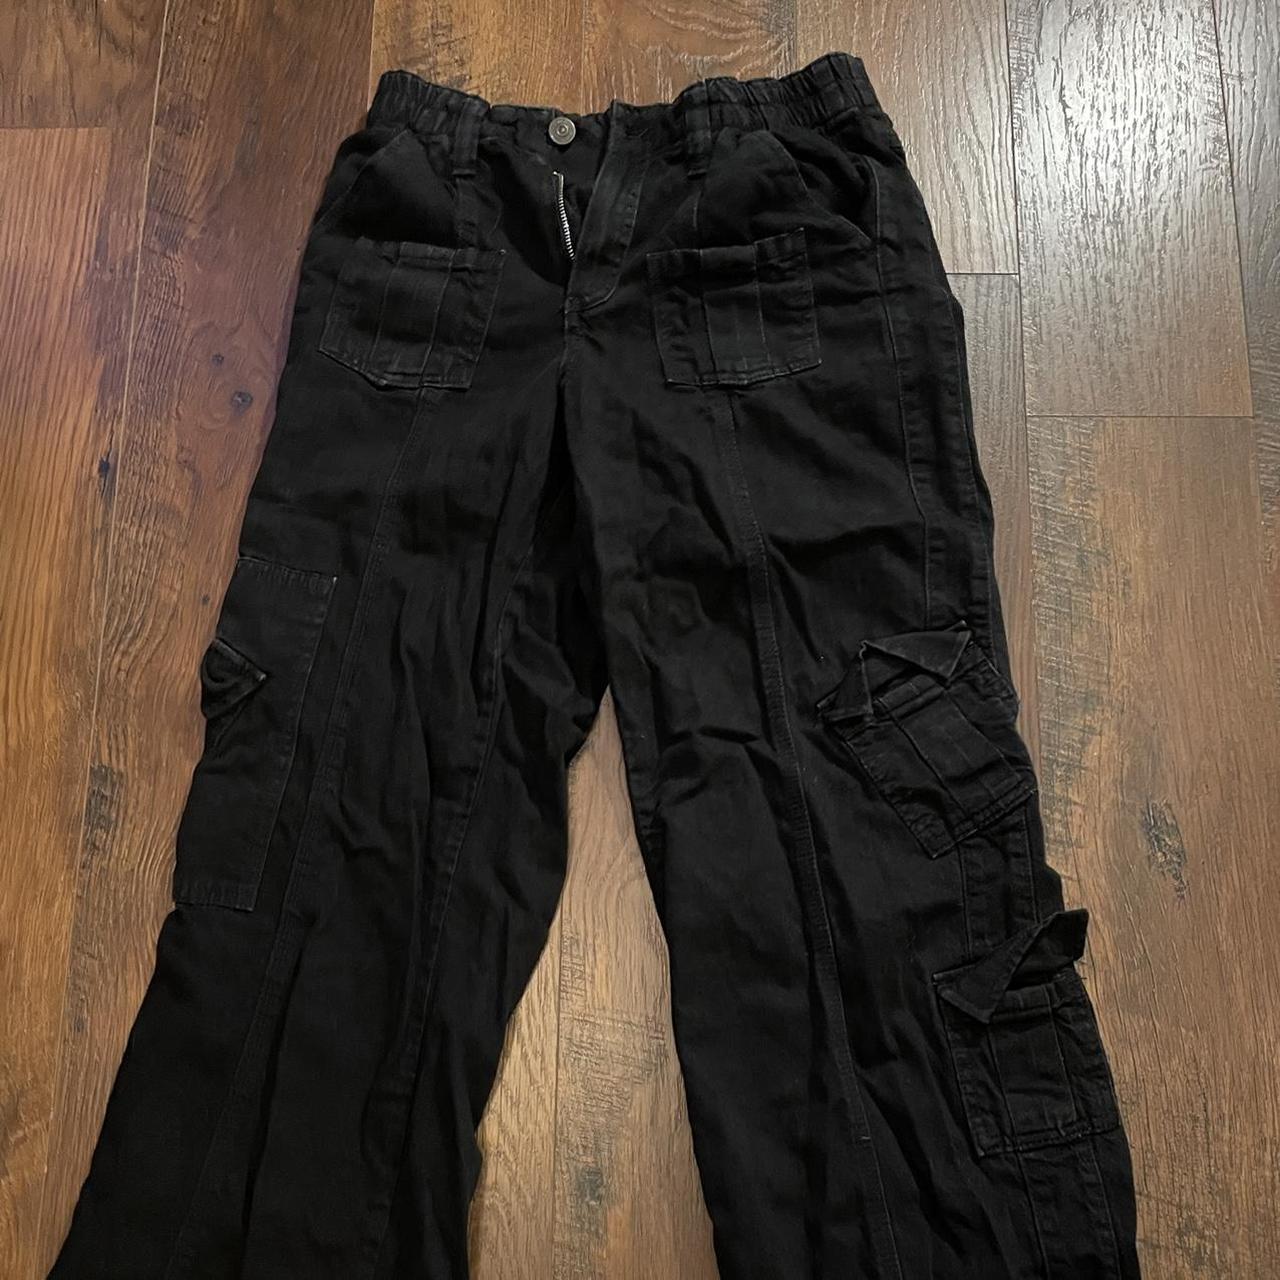 Urban outfitters black y2k low rise cargos! Super... - Depop